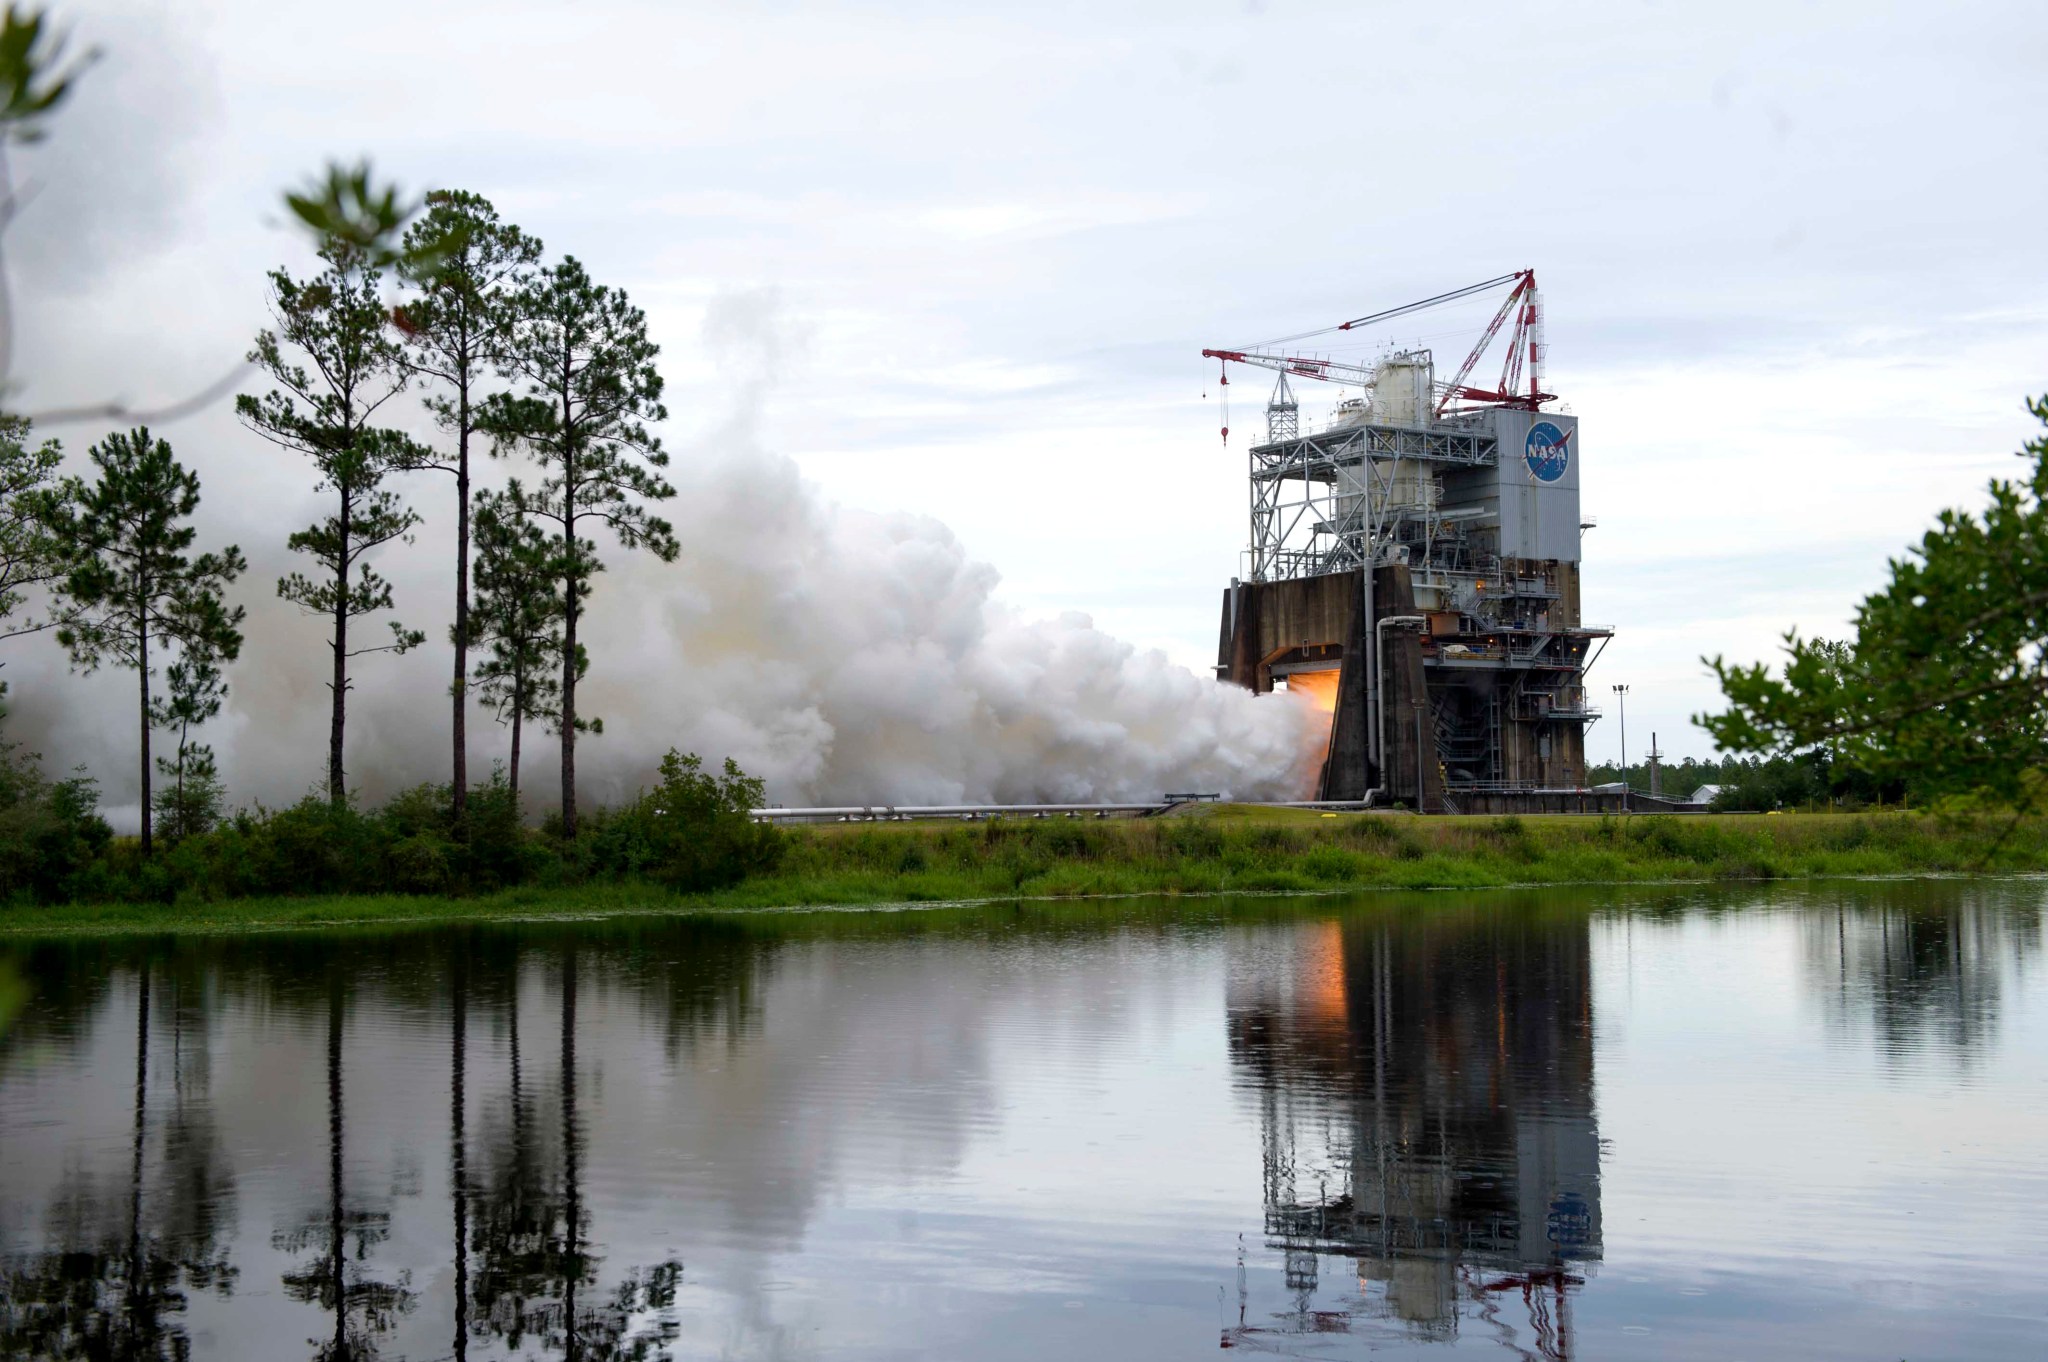 A test of RS-25 engine No. 0528 on July 14 